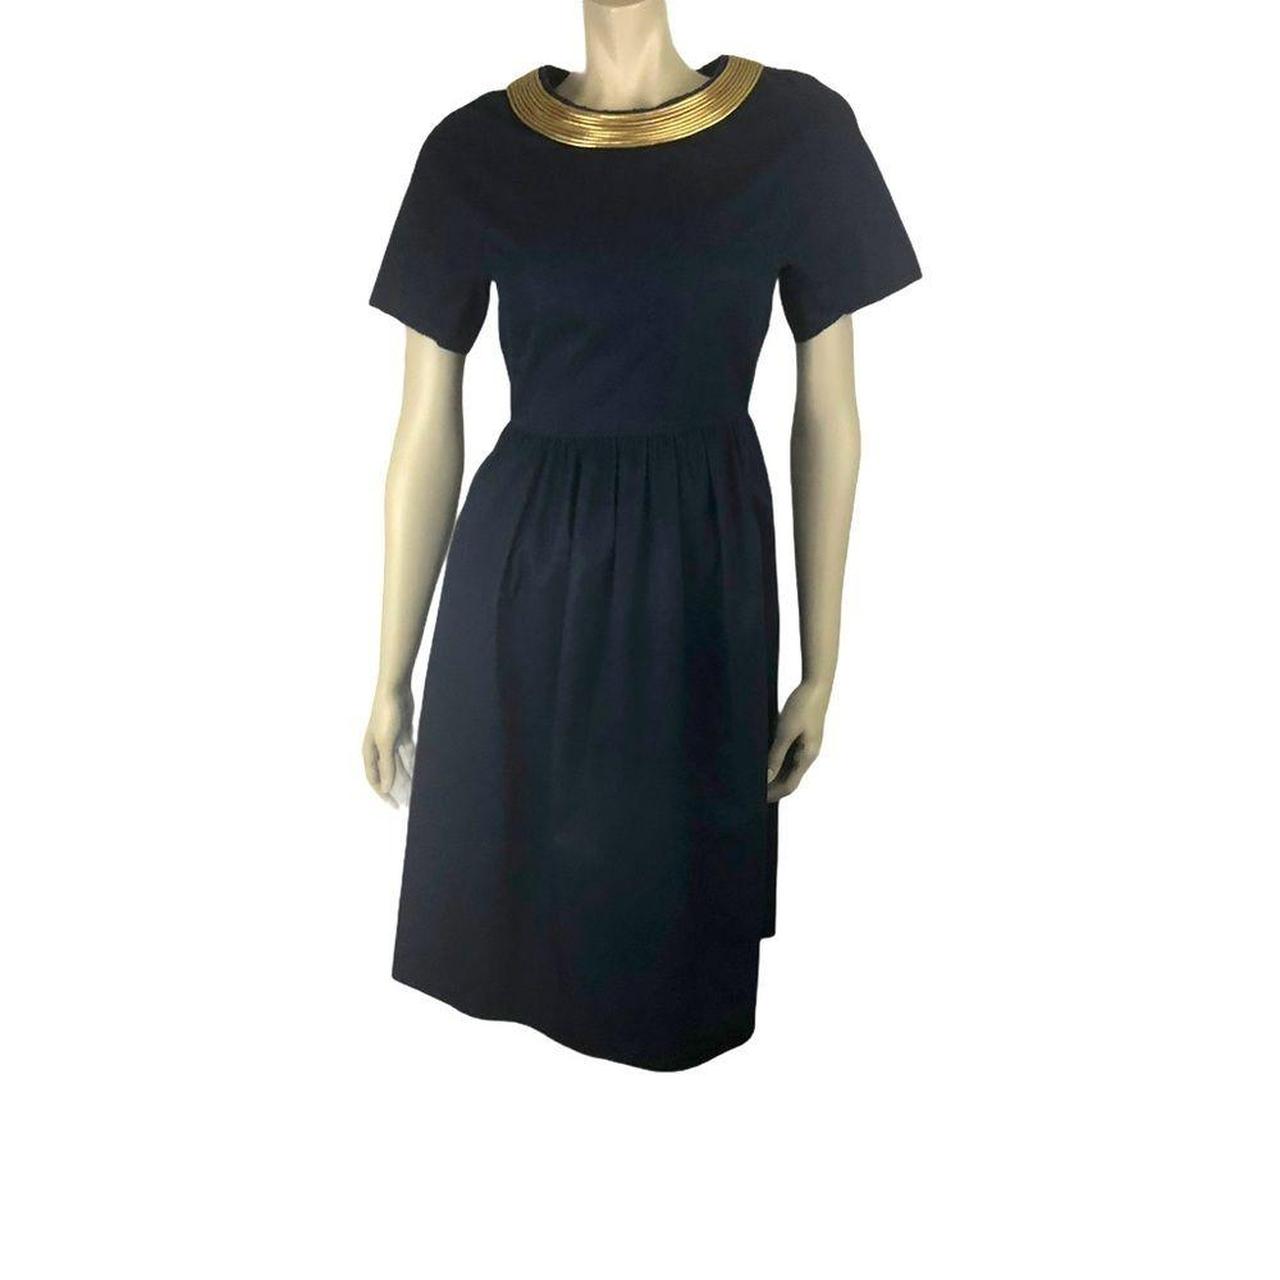 Product Image 2 - This navy cotton cocktail dress